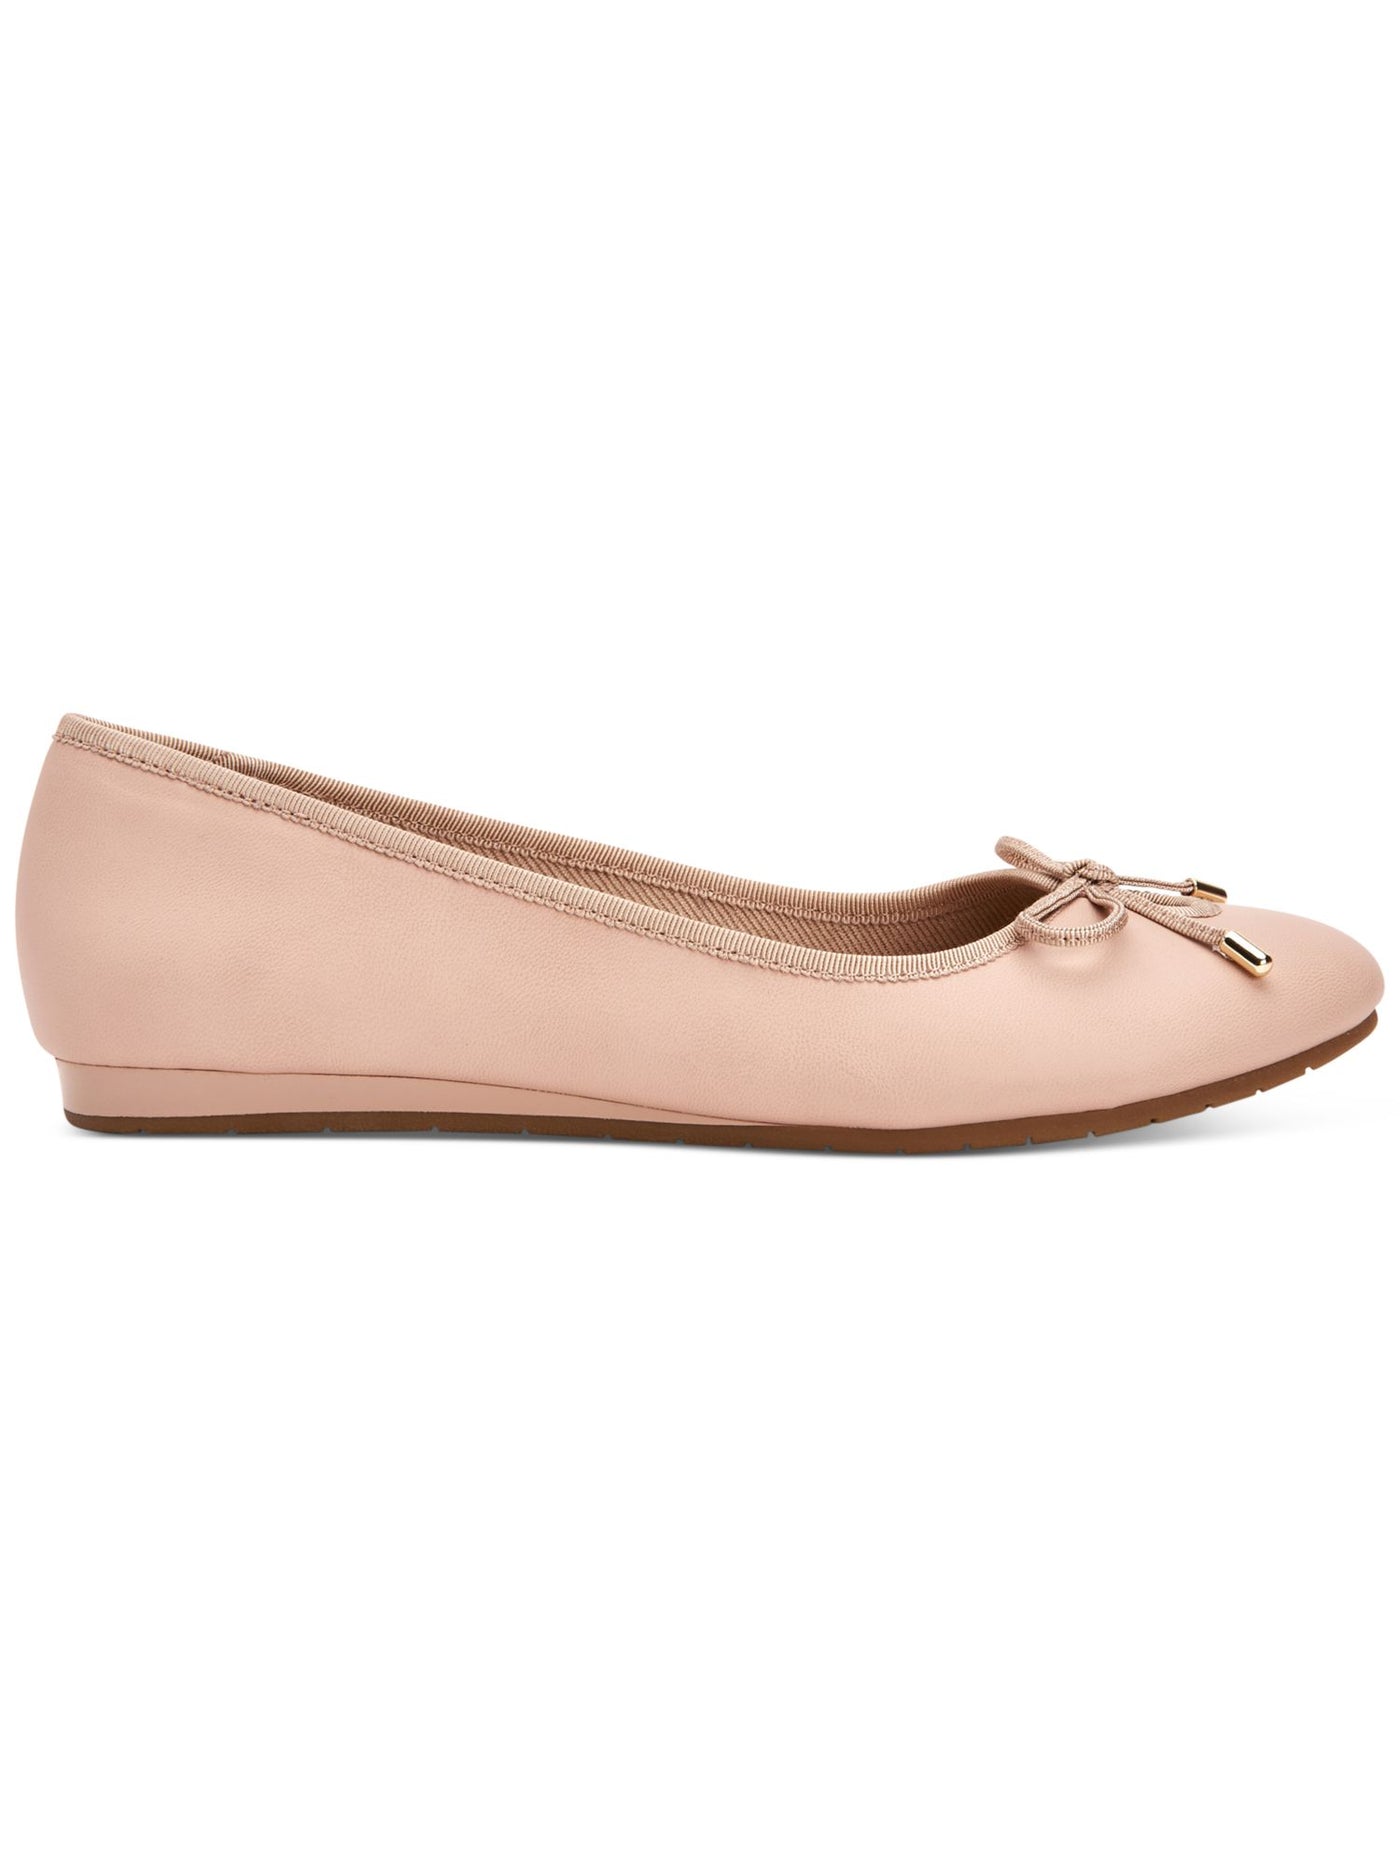 CHARTER CLUB Womens Pink Bow Accent Padded Bailynn Round Toe Slip On Ballet Flats M